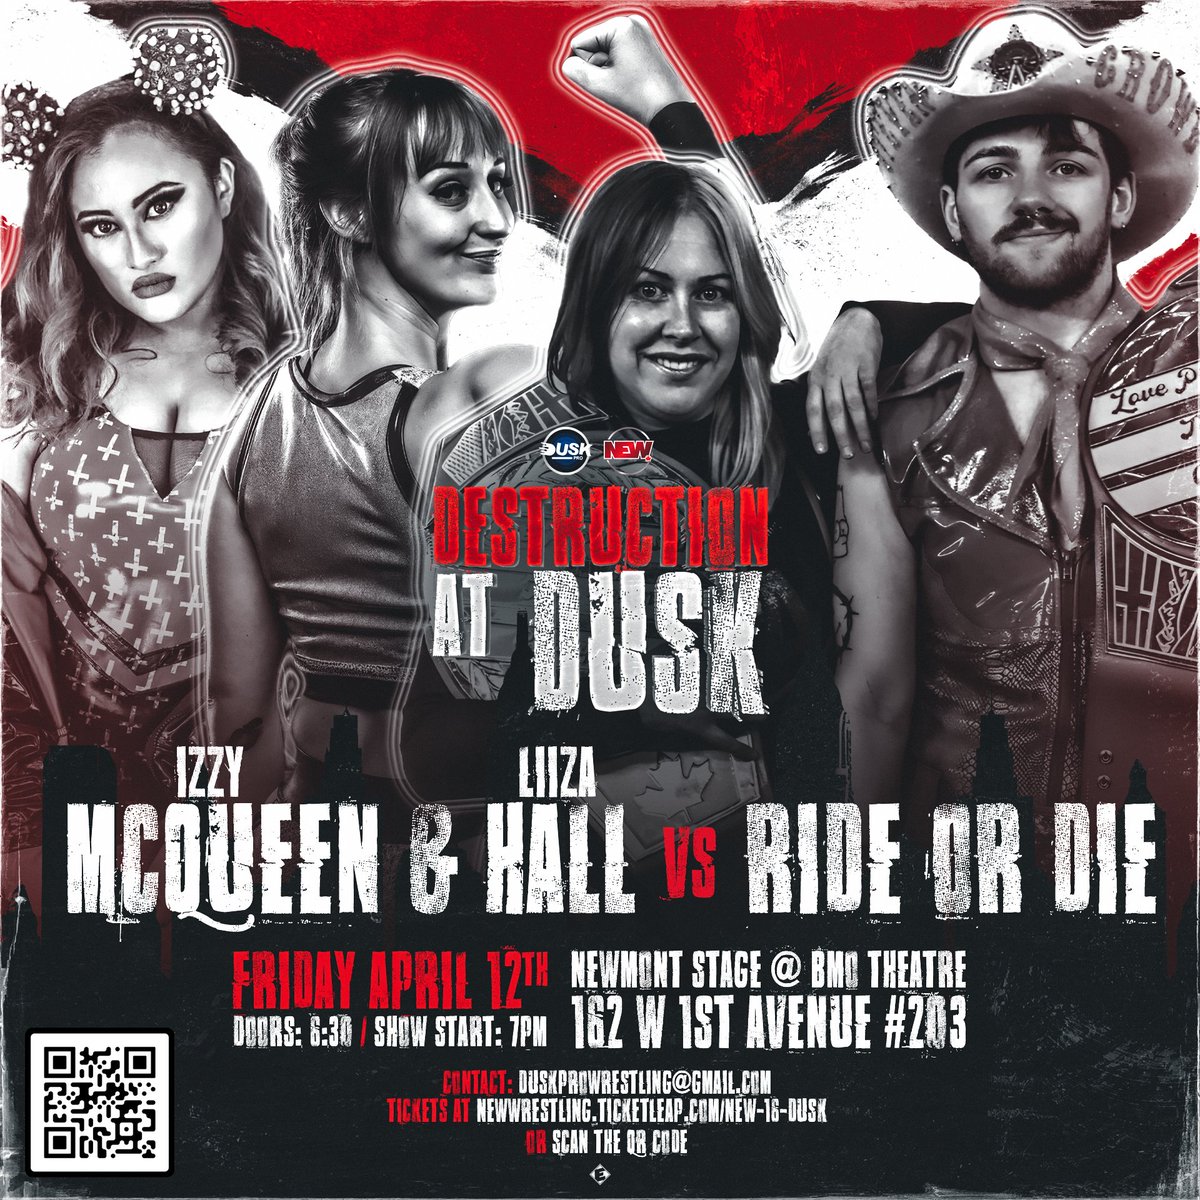 TFA has brought in her ride or die - Steven Crowe to deal with the Liiza problem. Liiza's gonna need help fighting the LPW Tag Champs & who better to deal with a cowboy than thine goblin king? On April 12th @iMcQueen_X & Liiza Hall take on Ride or Die! 🎟 link below